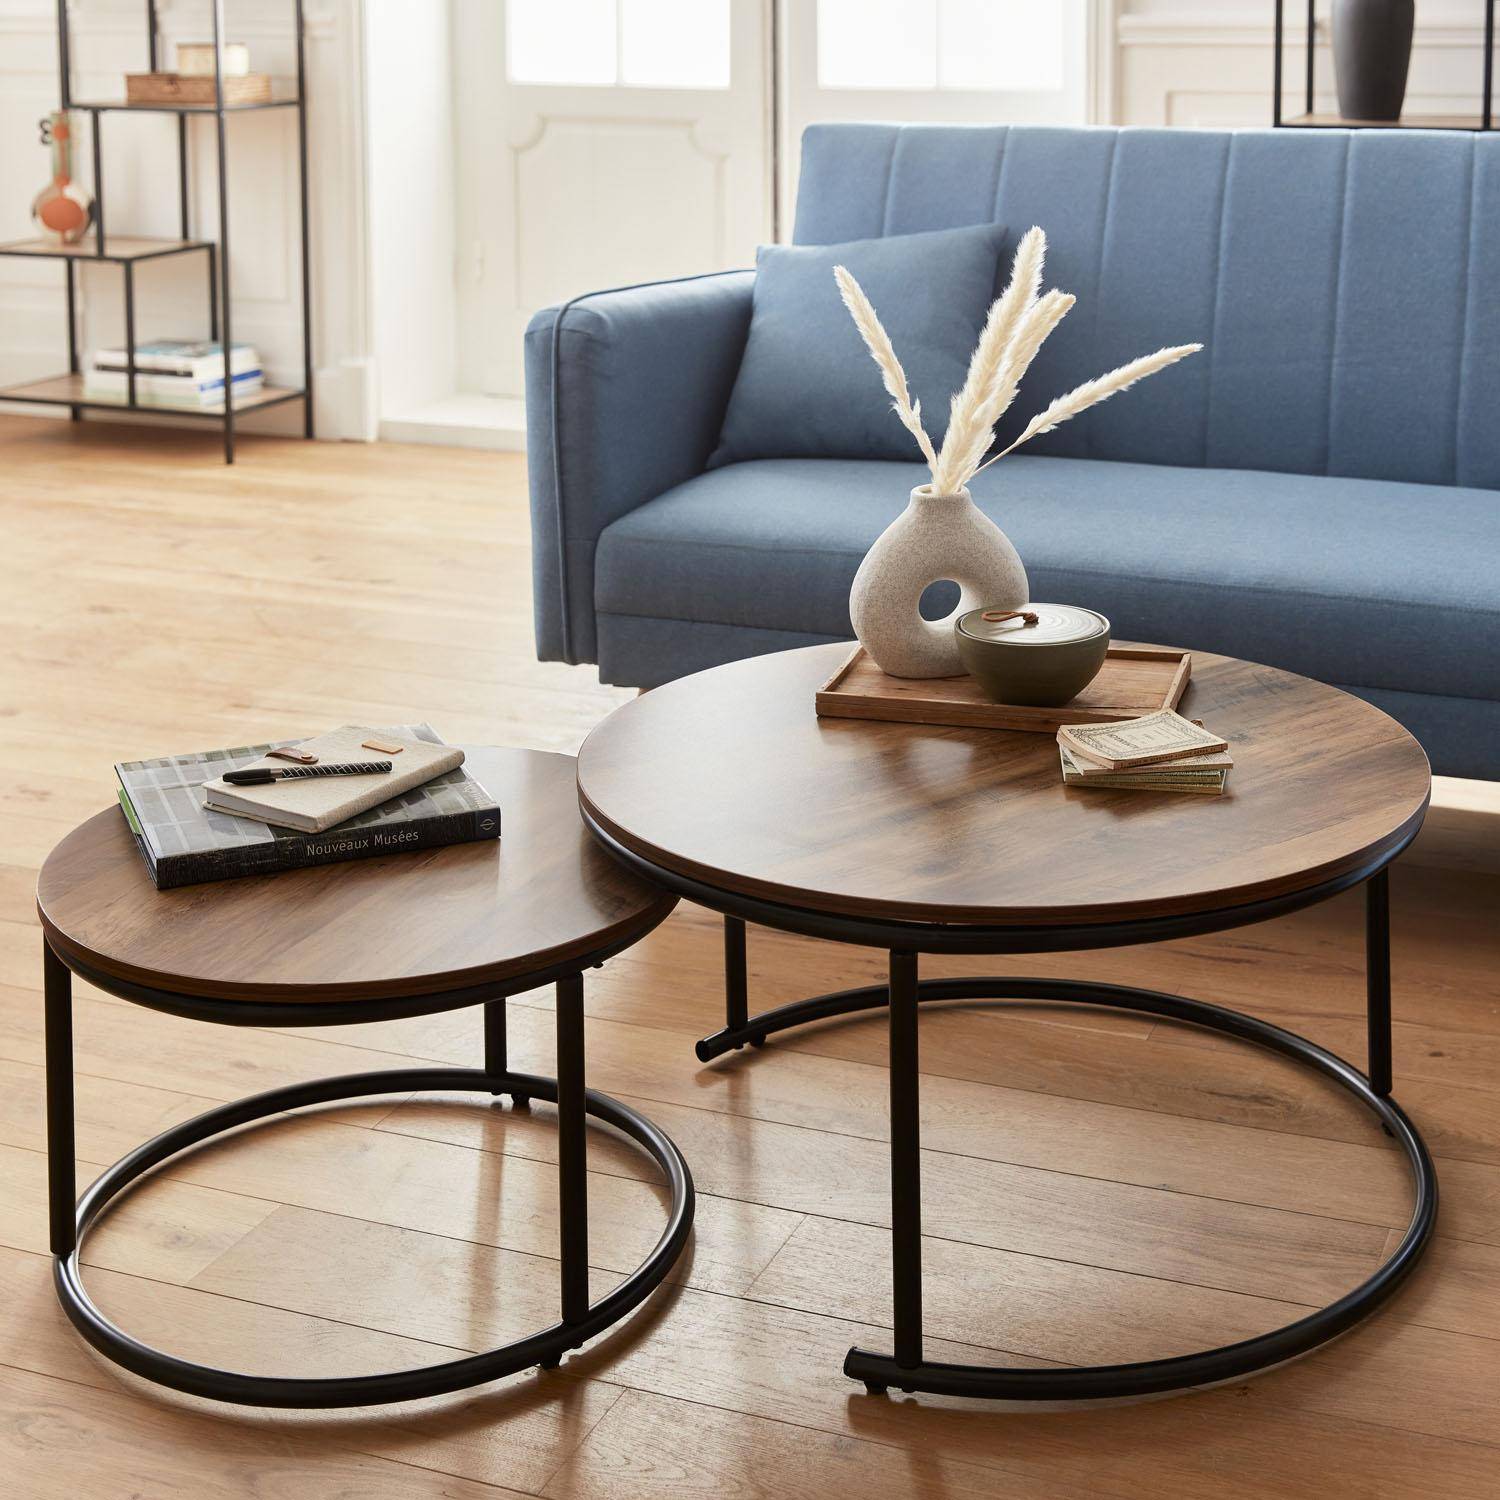 Pair of round, metal and wood-effect nesting coffee tables, 77x40x57cm - Loft,sweeek,Photo1